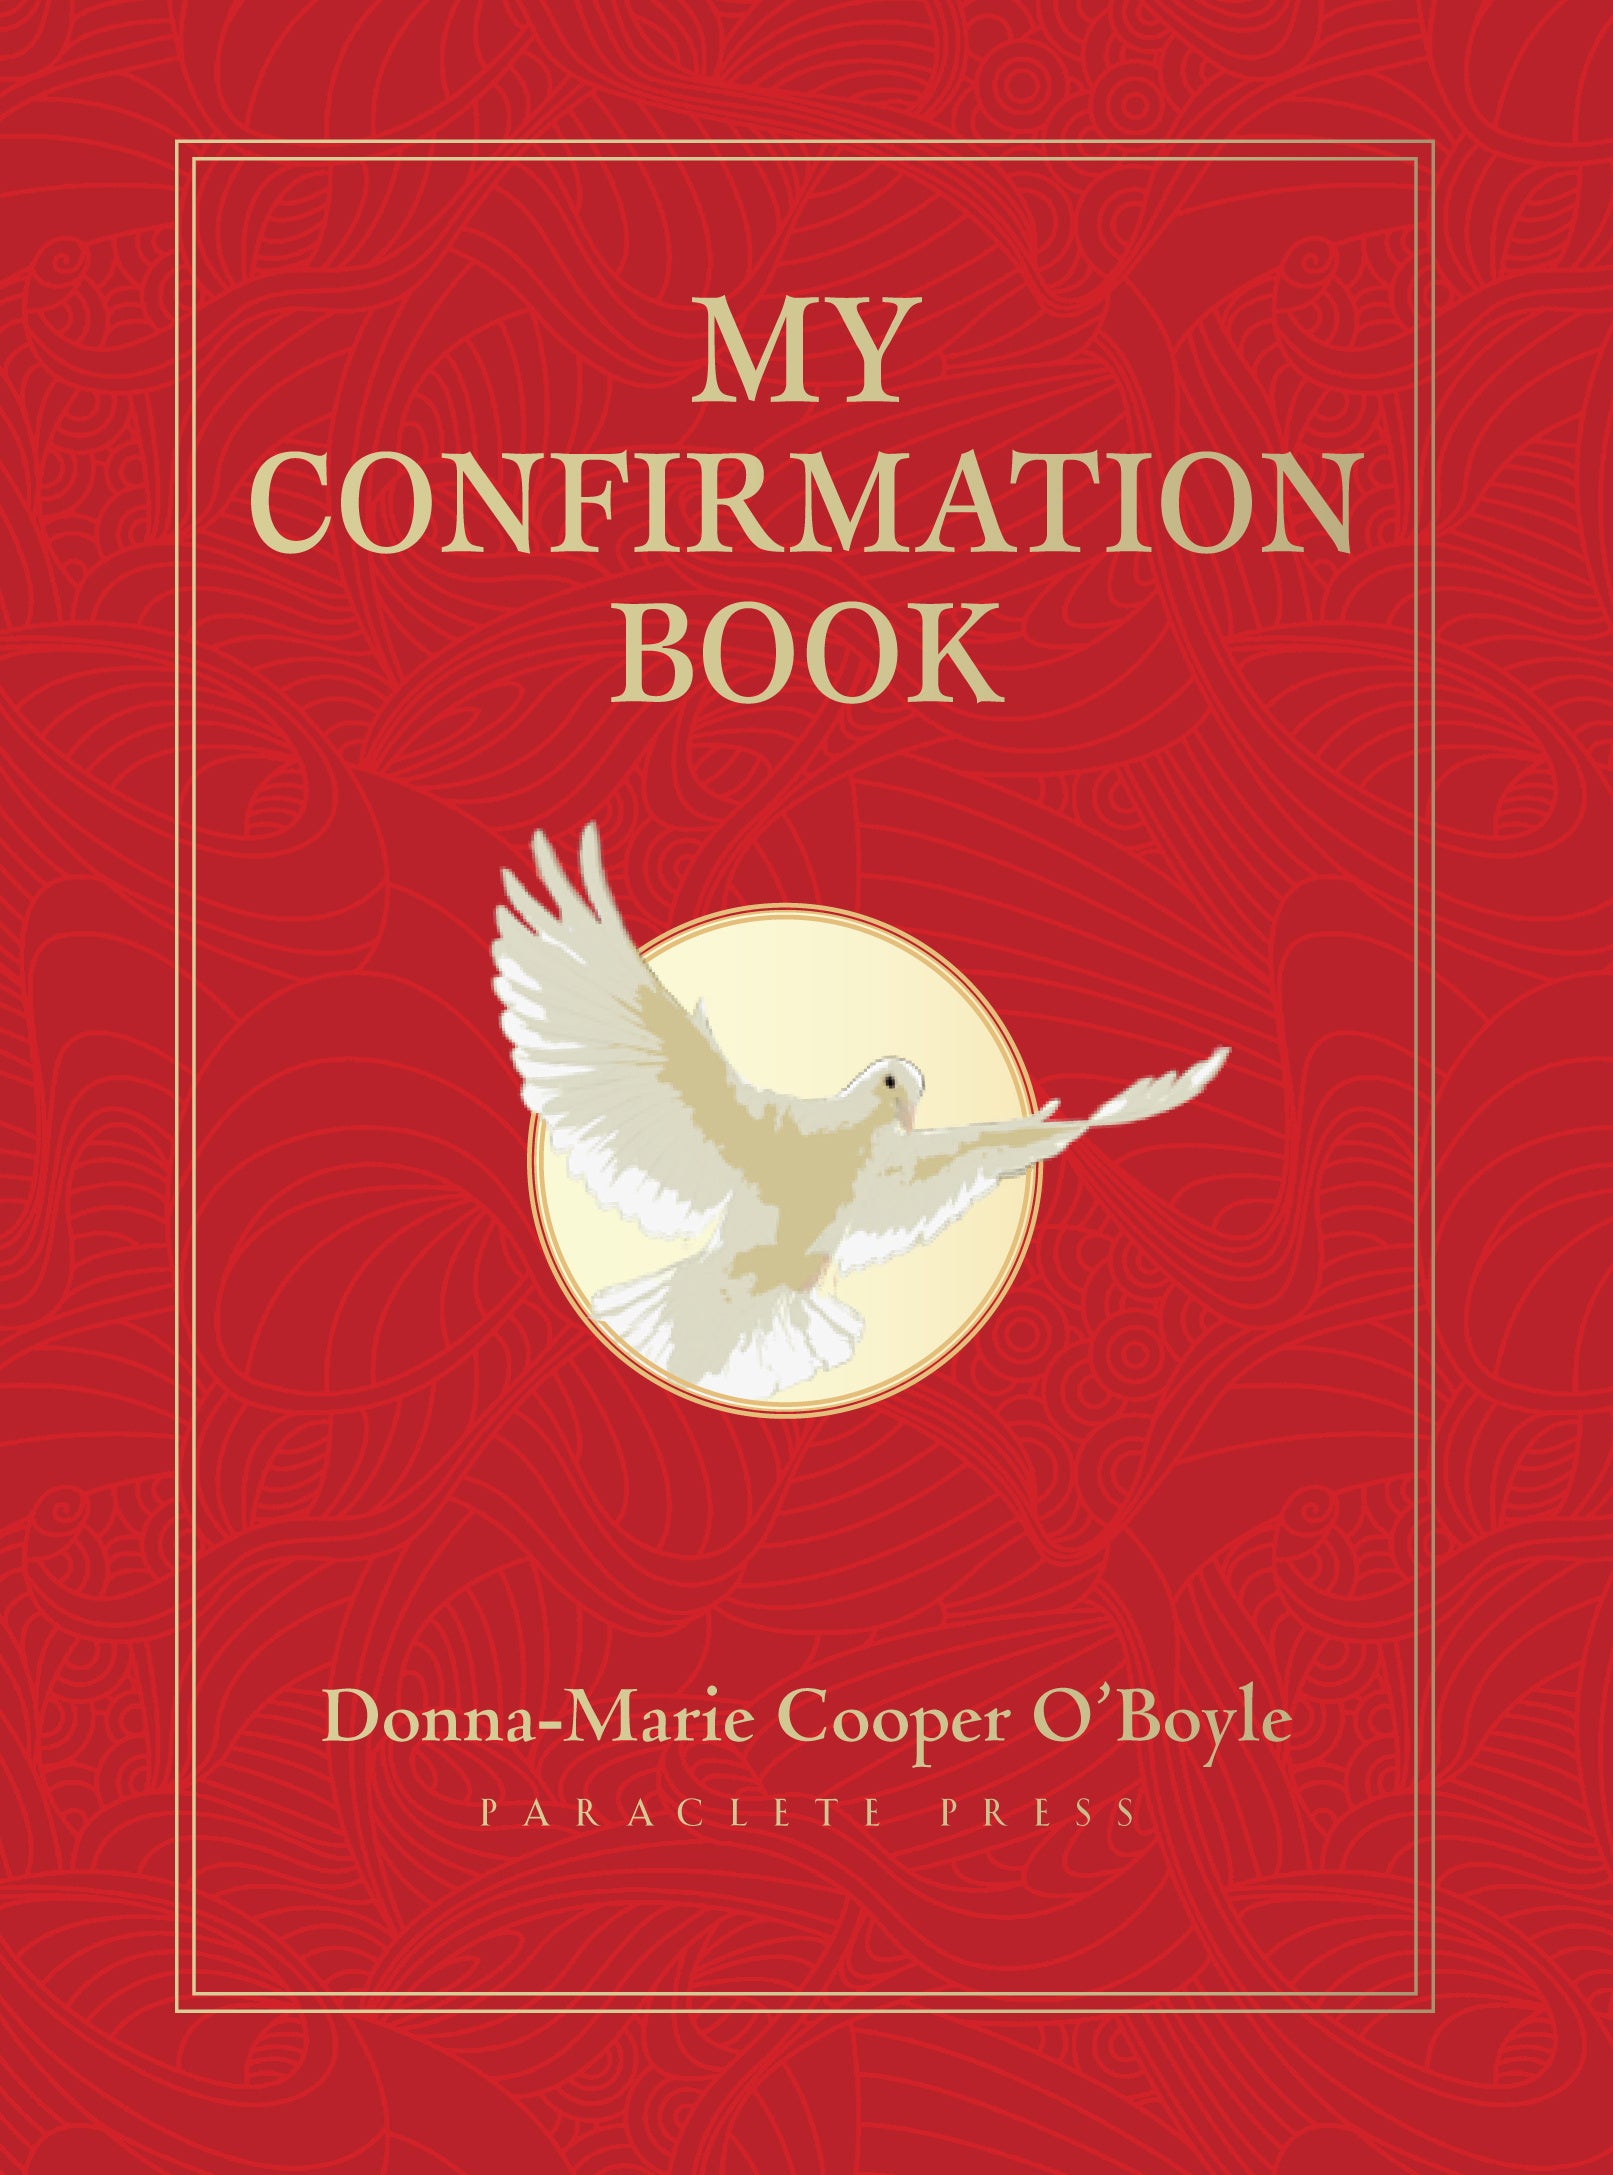 Image of My Confirmation Book other